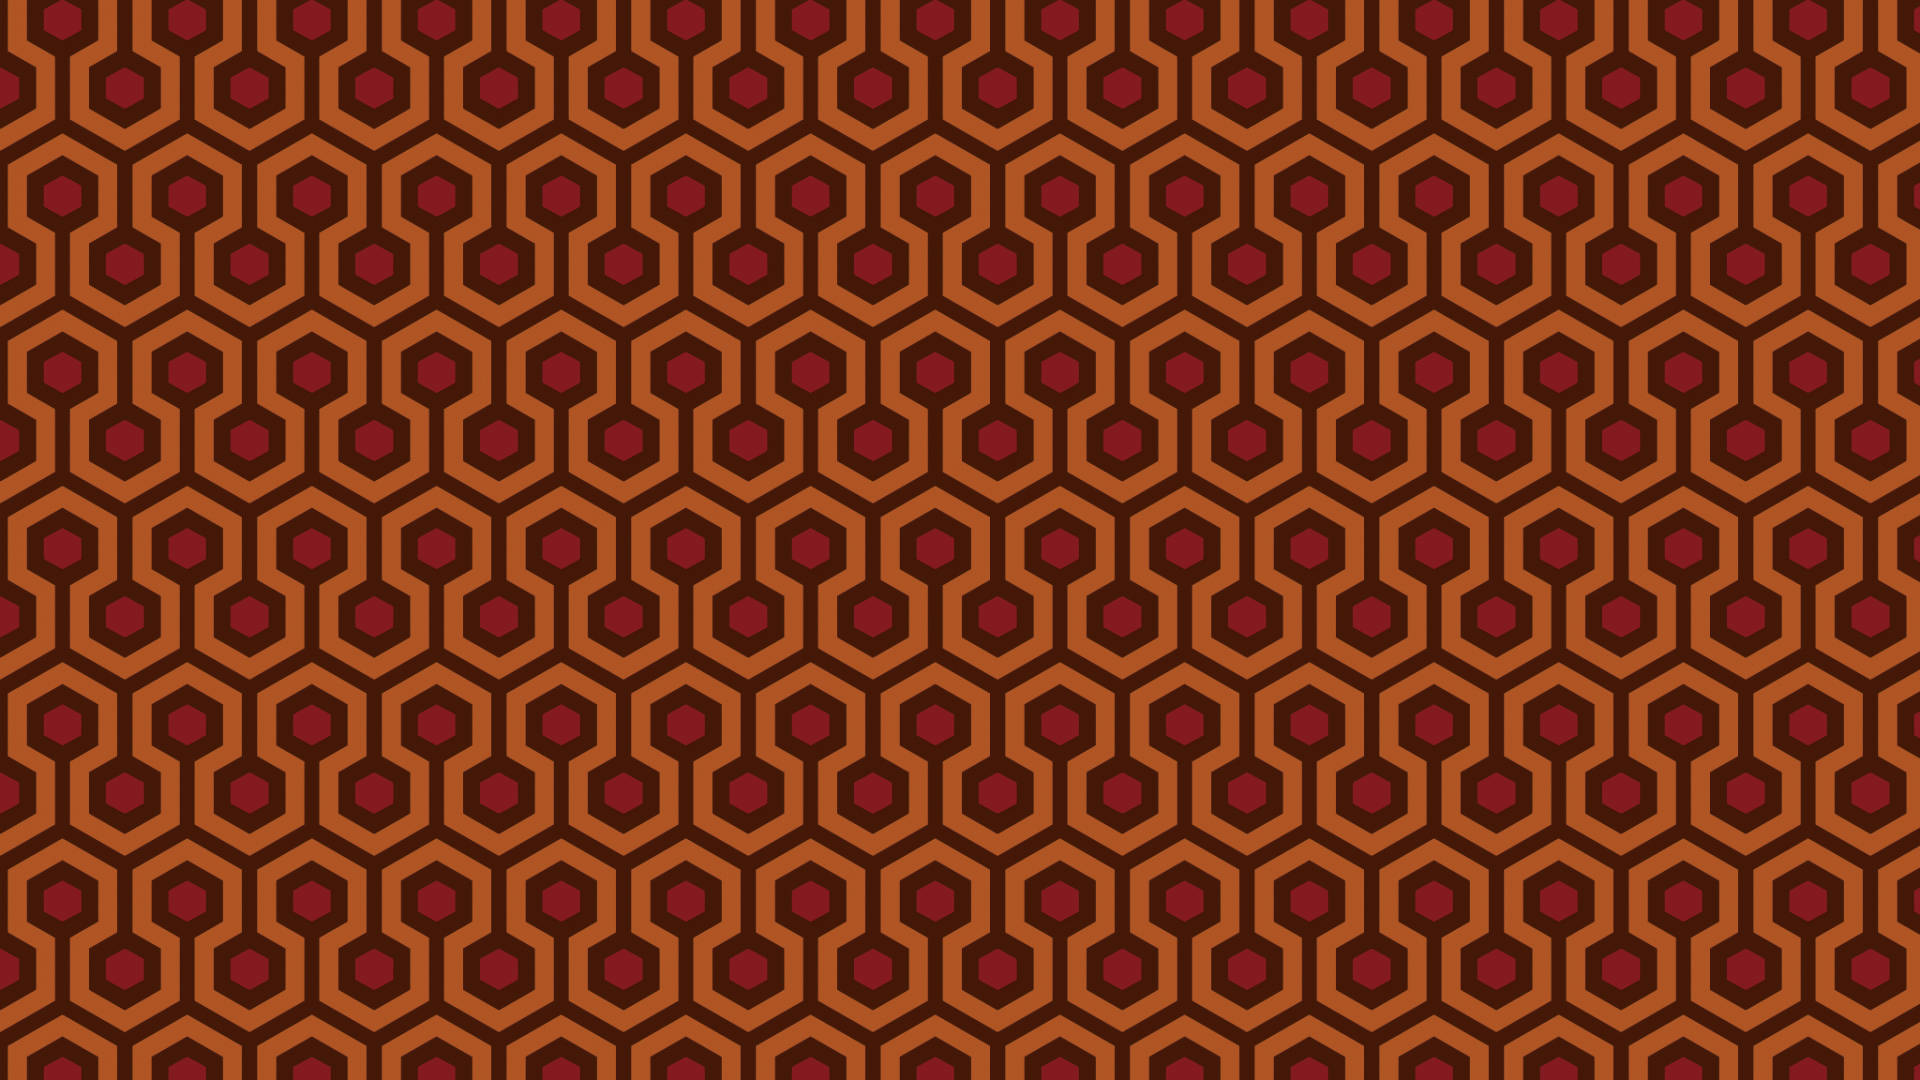 The Iconic Carpet Pattern from The Shining Movie Wallpaper